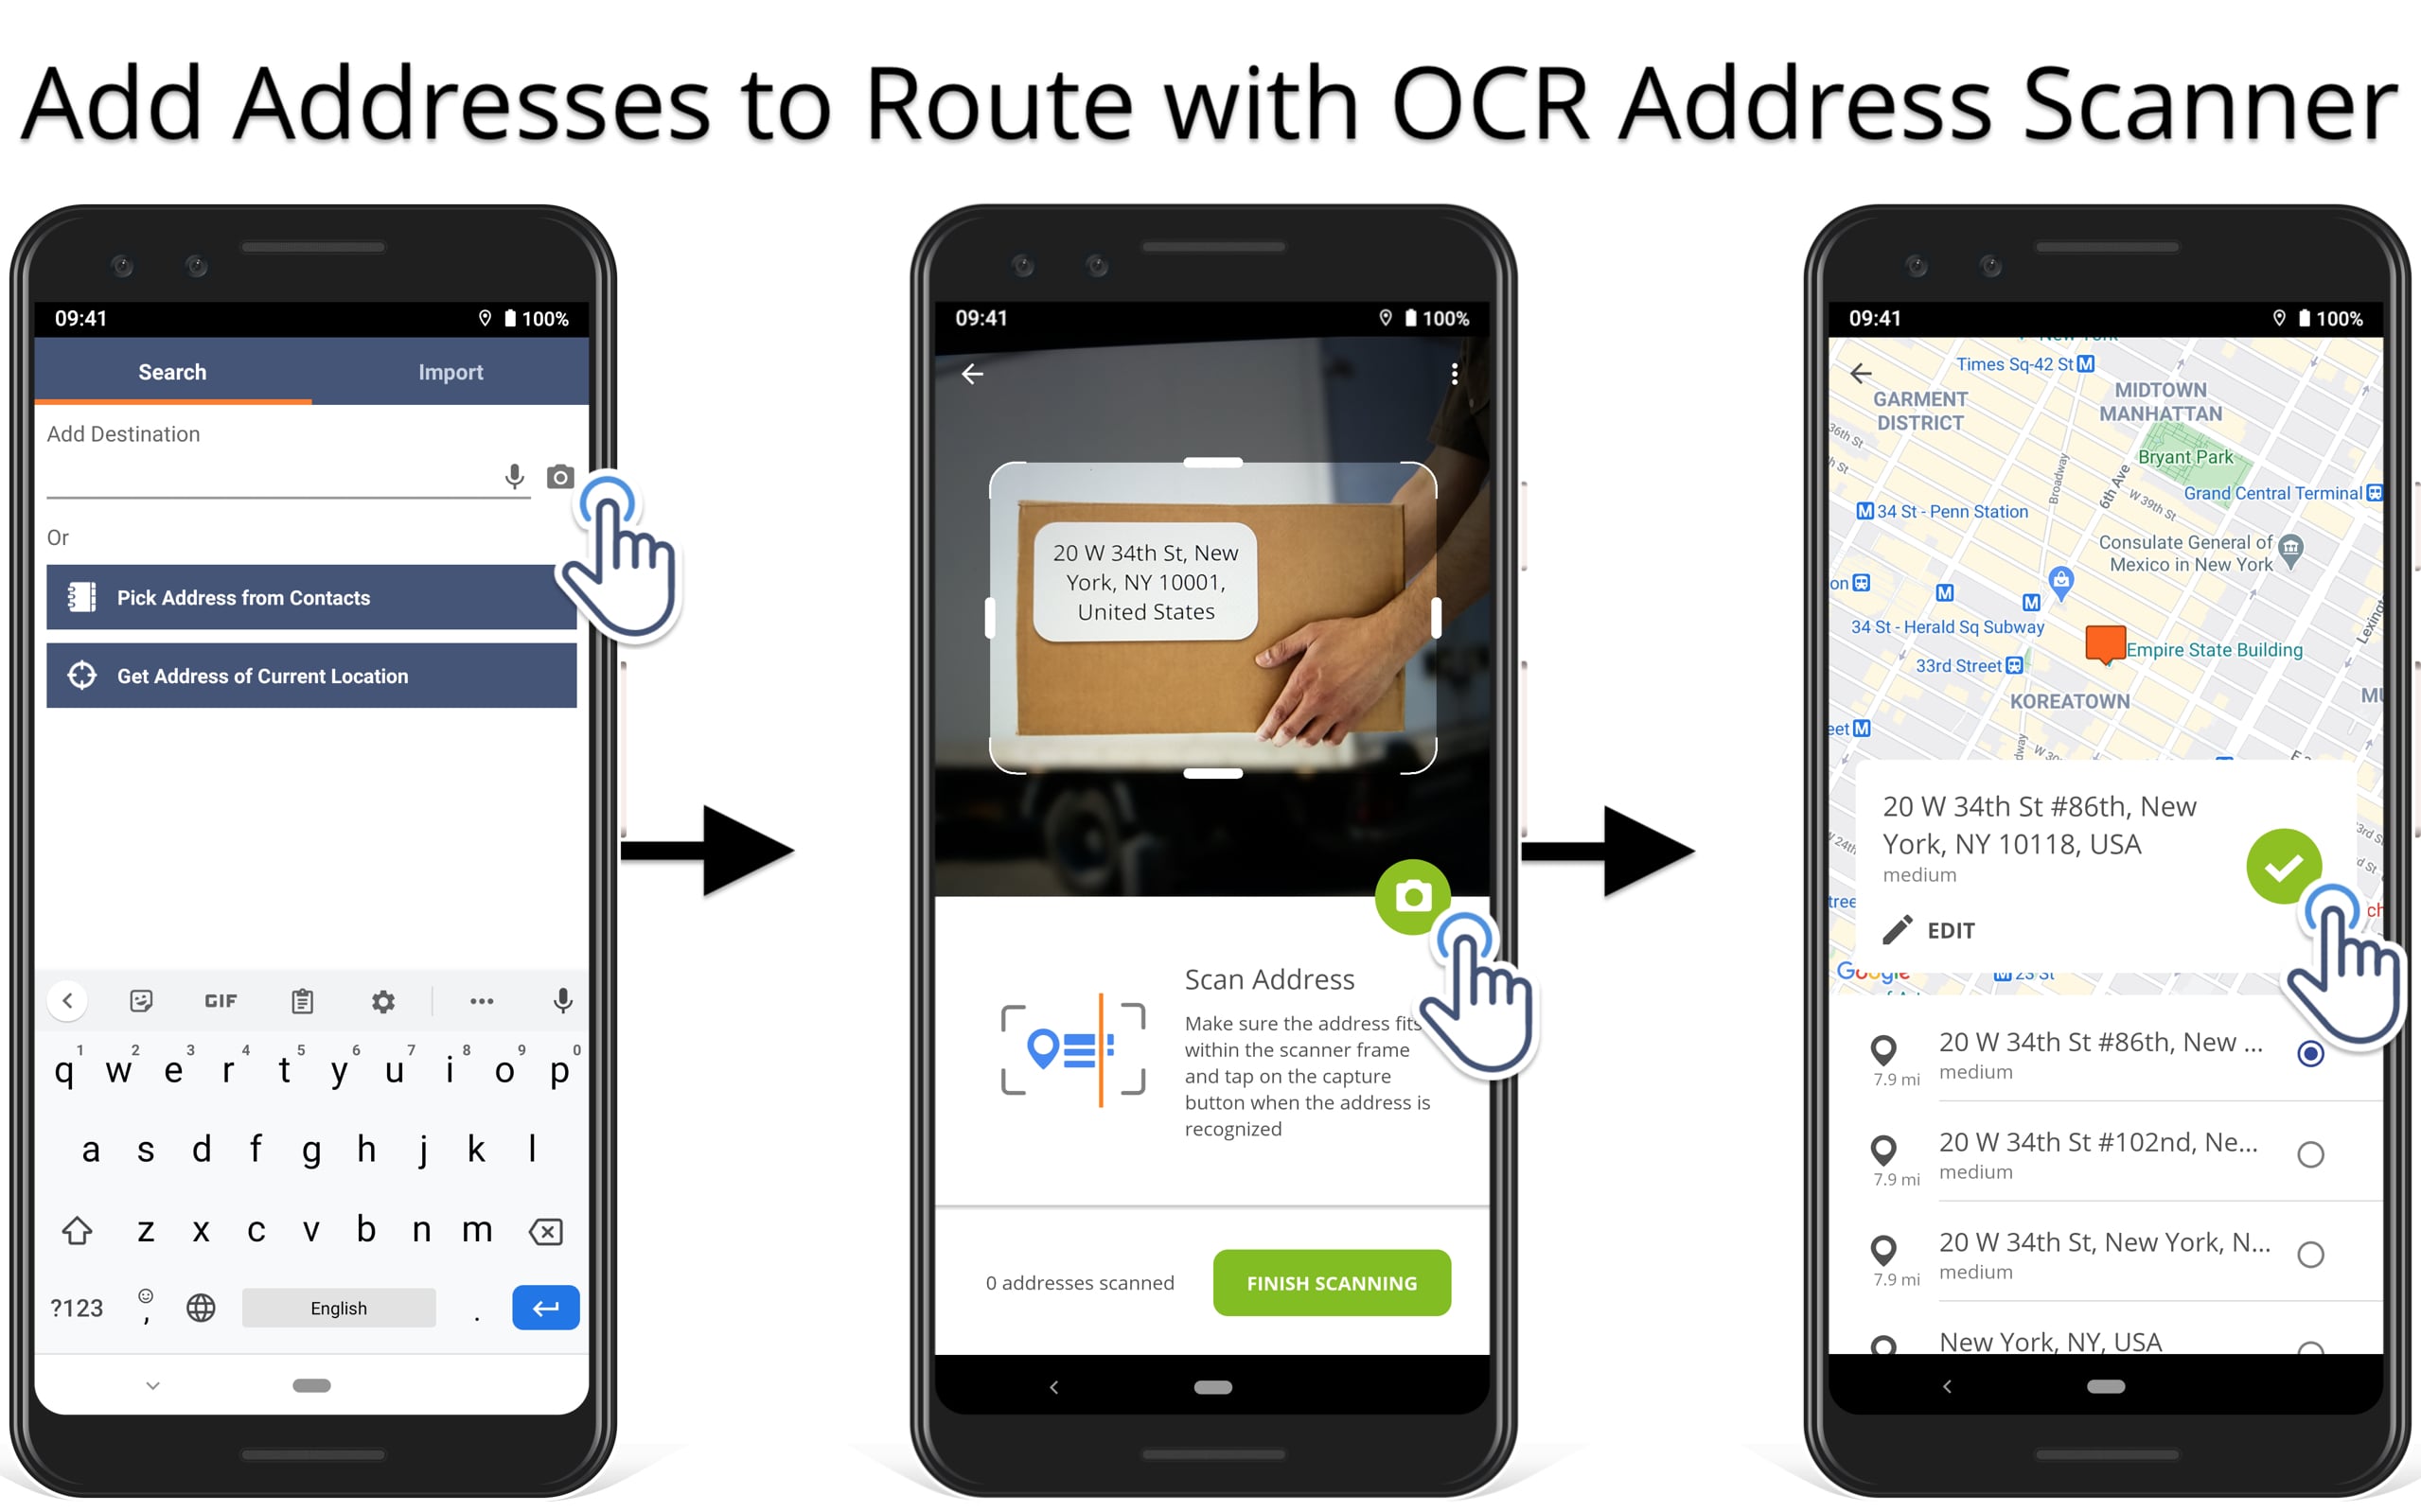 scan addresses to add them to route